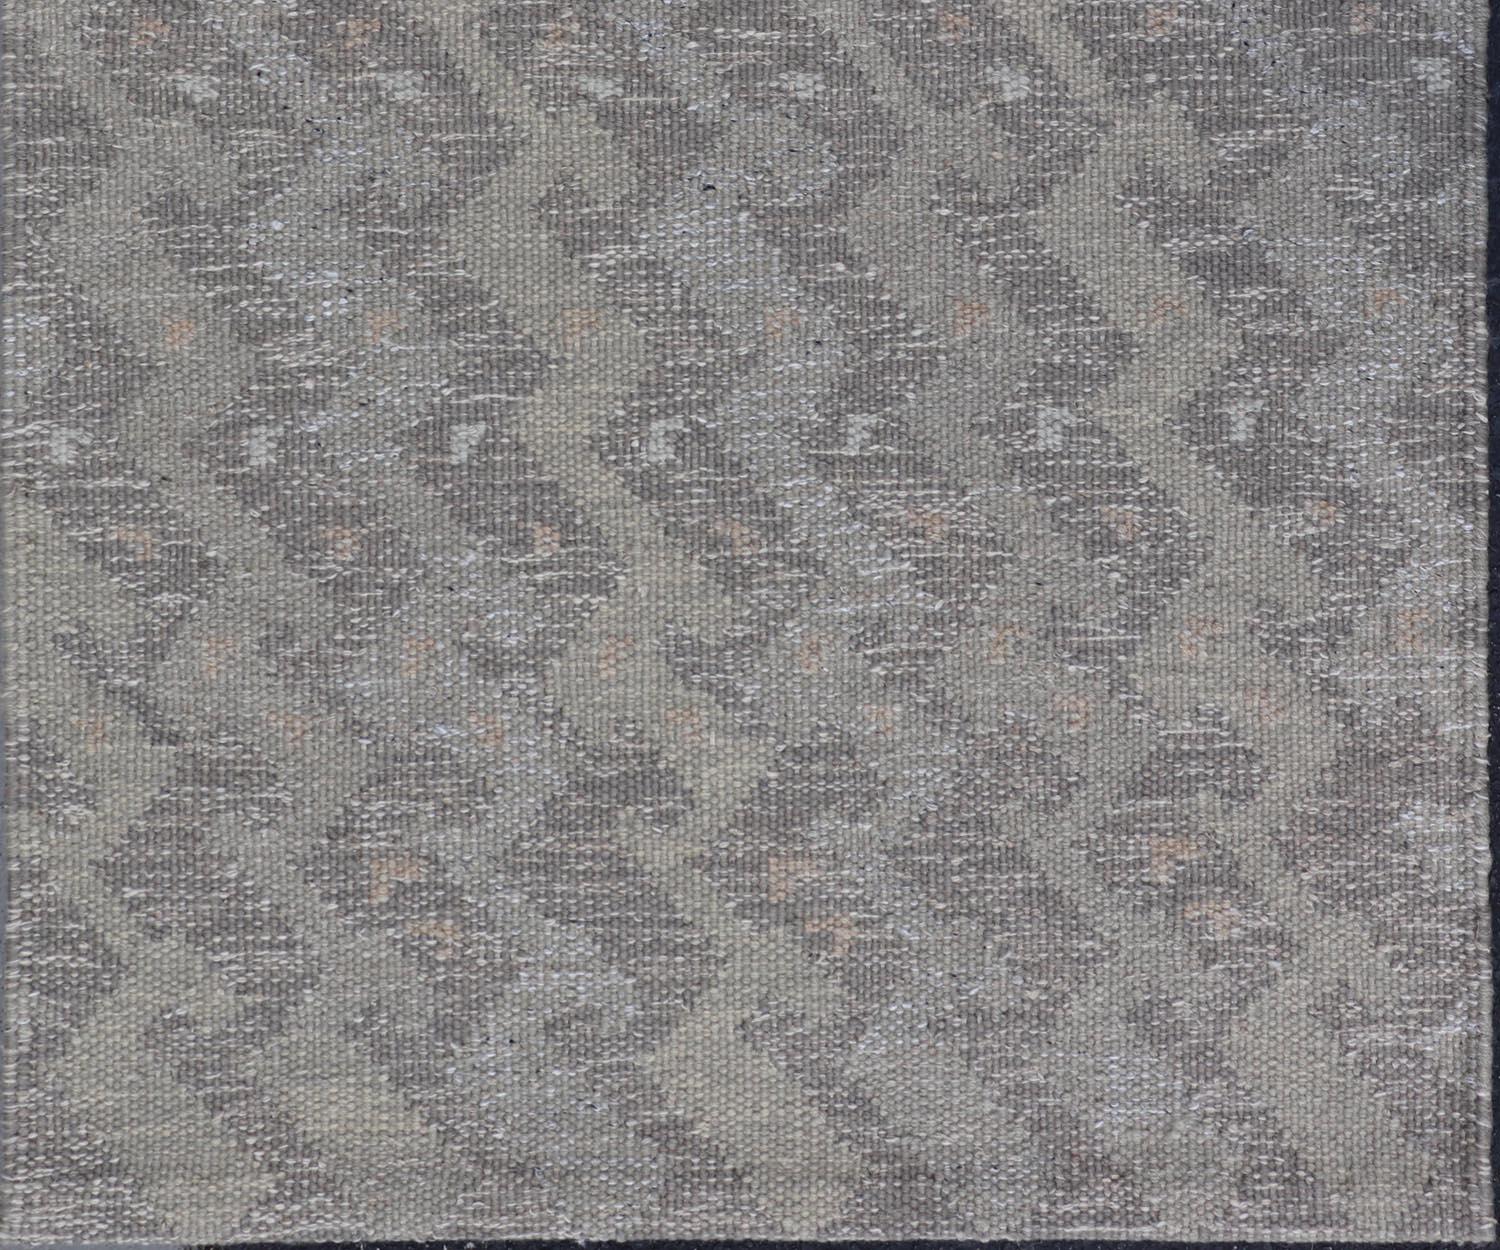 Geometric Modern Scandinavian Flat-Weave Design Rug in Gray And Light Gray Tones In New Condition For Sale In Atlanta, GA